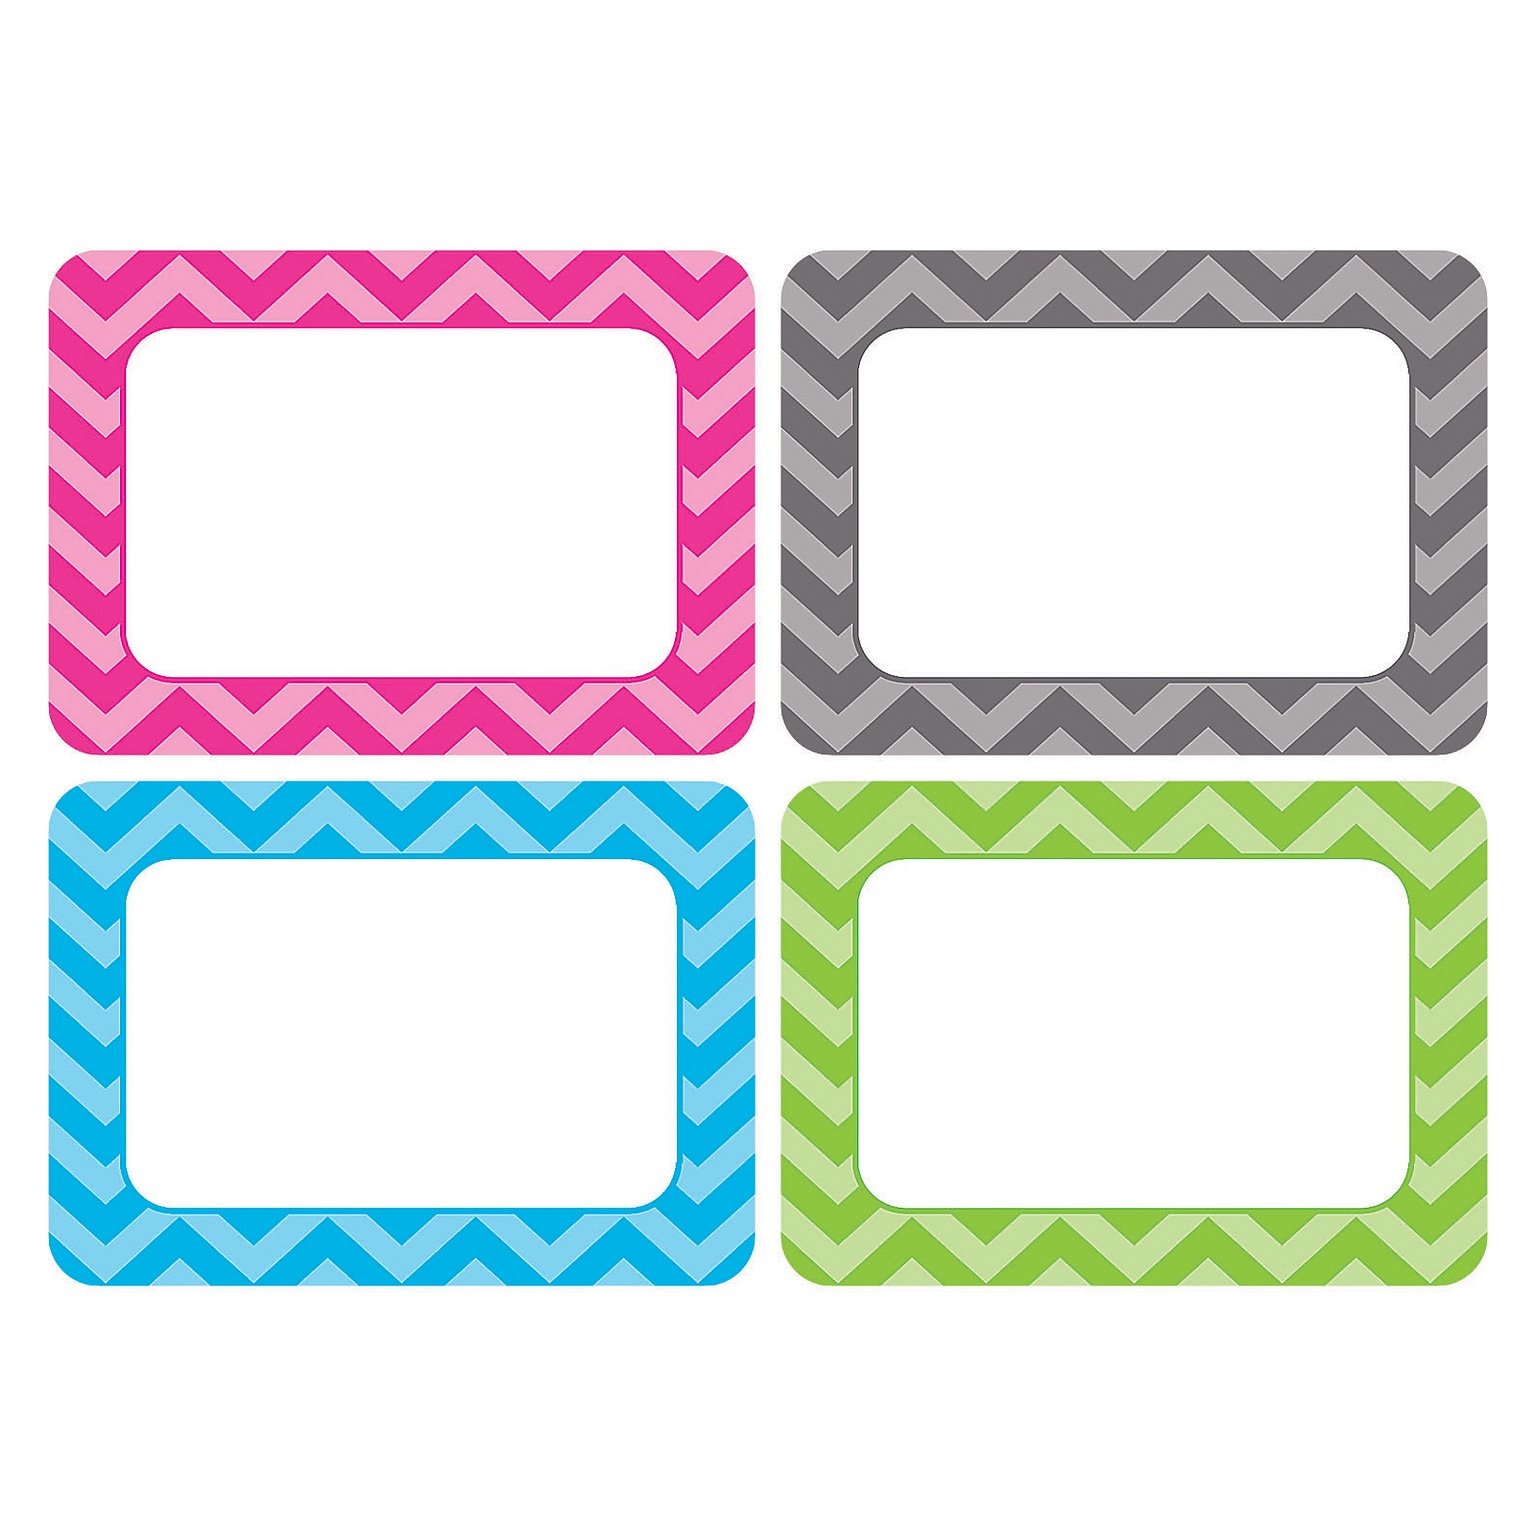 Teacher Created Resources® Assorted Colored Chevron Name Tags, 3.5 x 2.5, 36 Per Pack, 6 Packs (TCR5526-6)